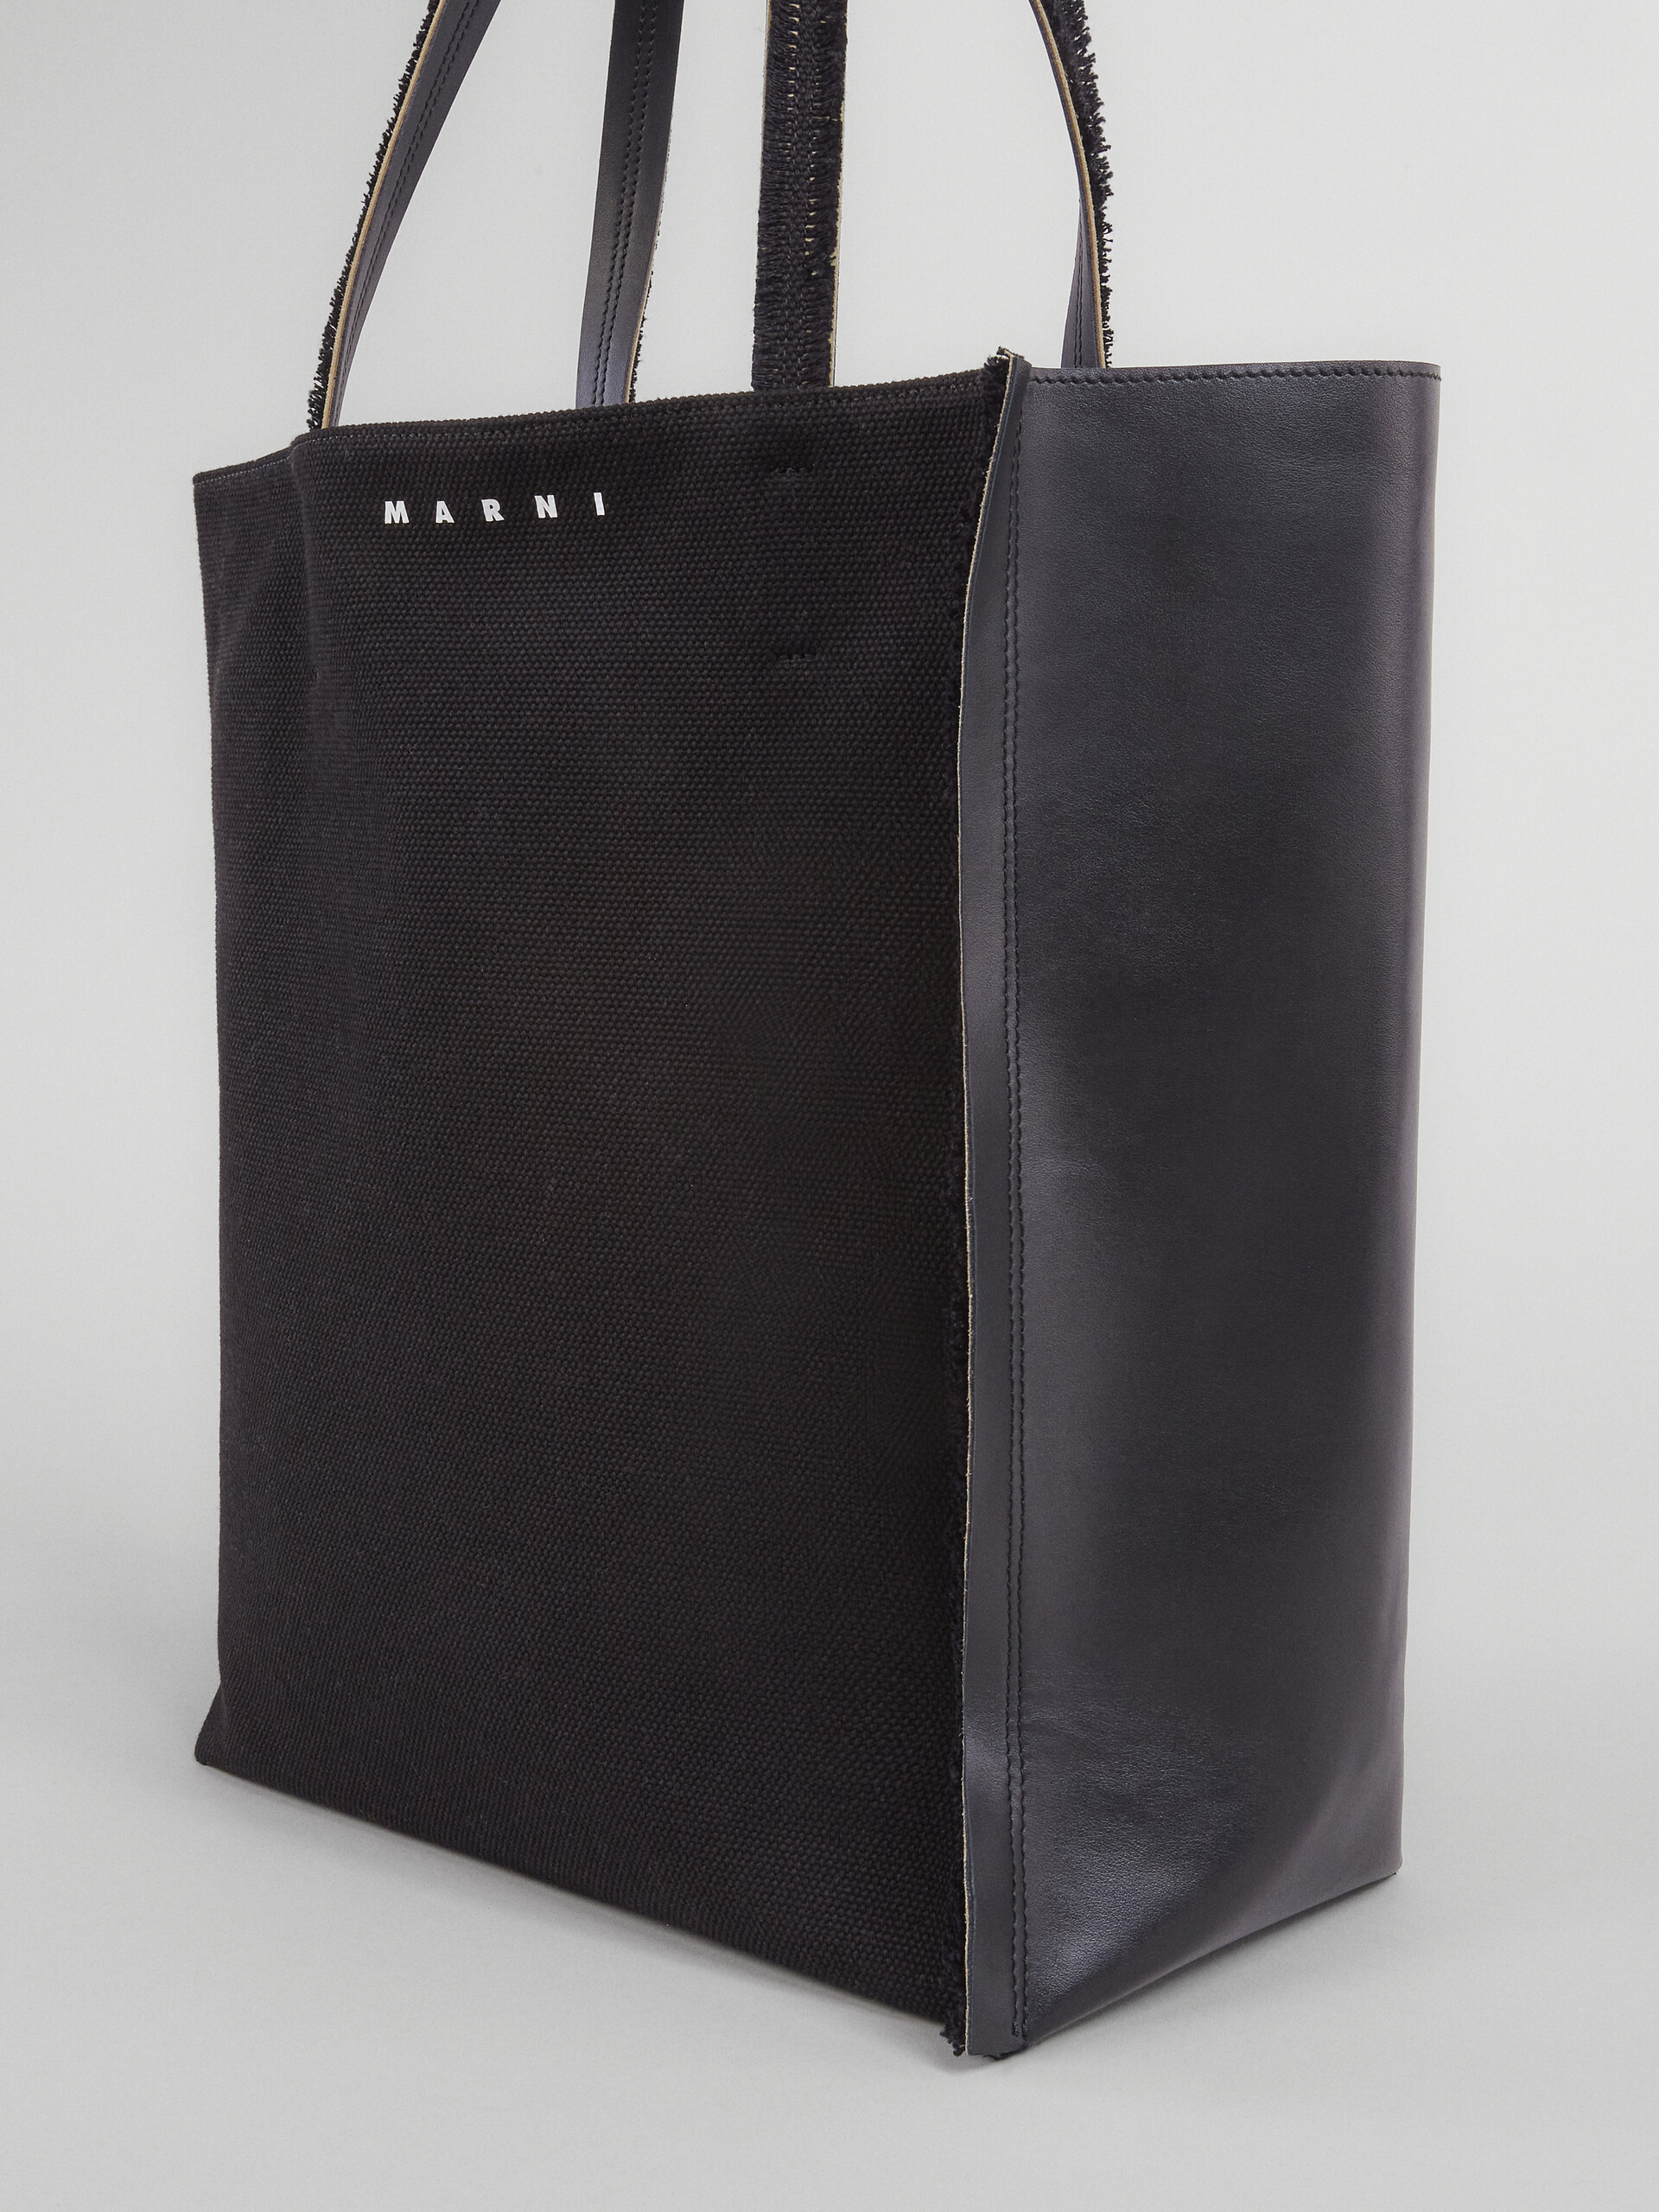 MUSEO SOFT large bag in black leather and canvas - Shopping Bags - Image 5